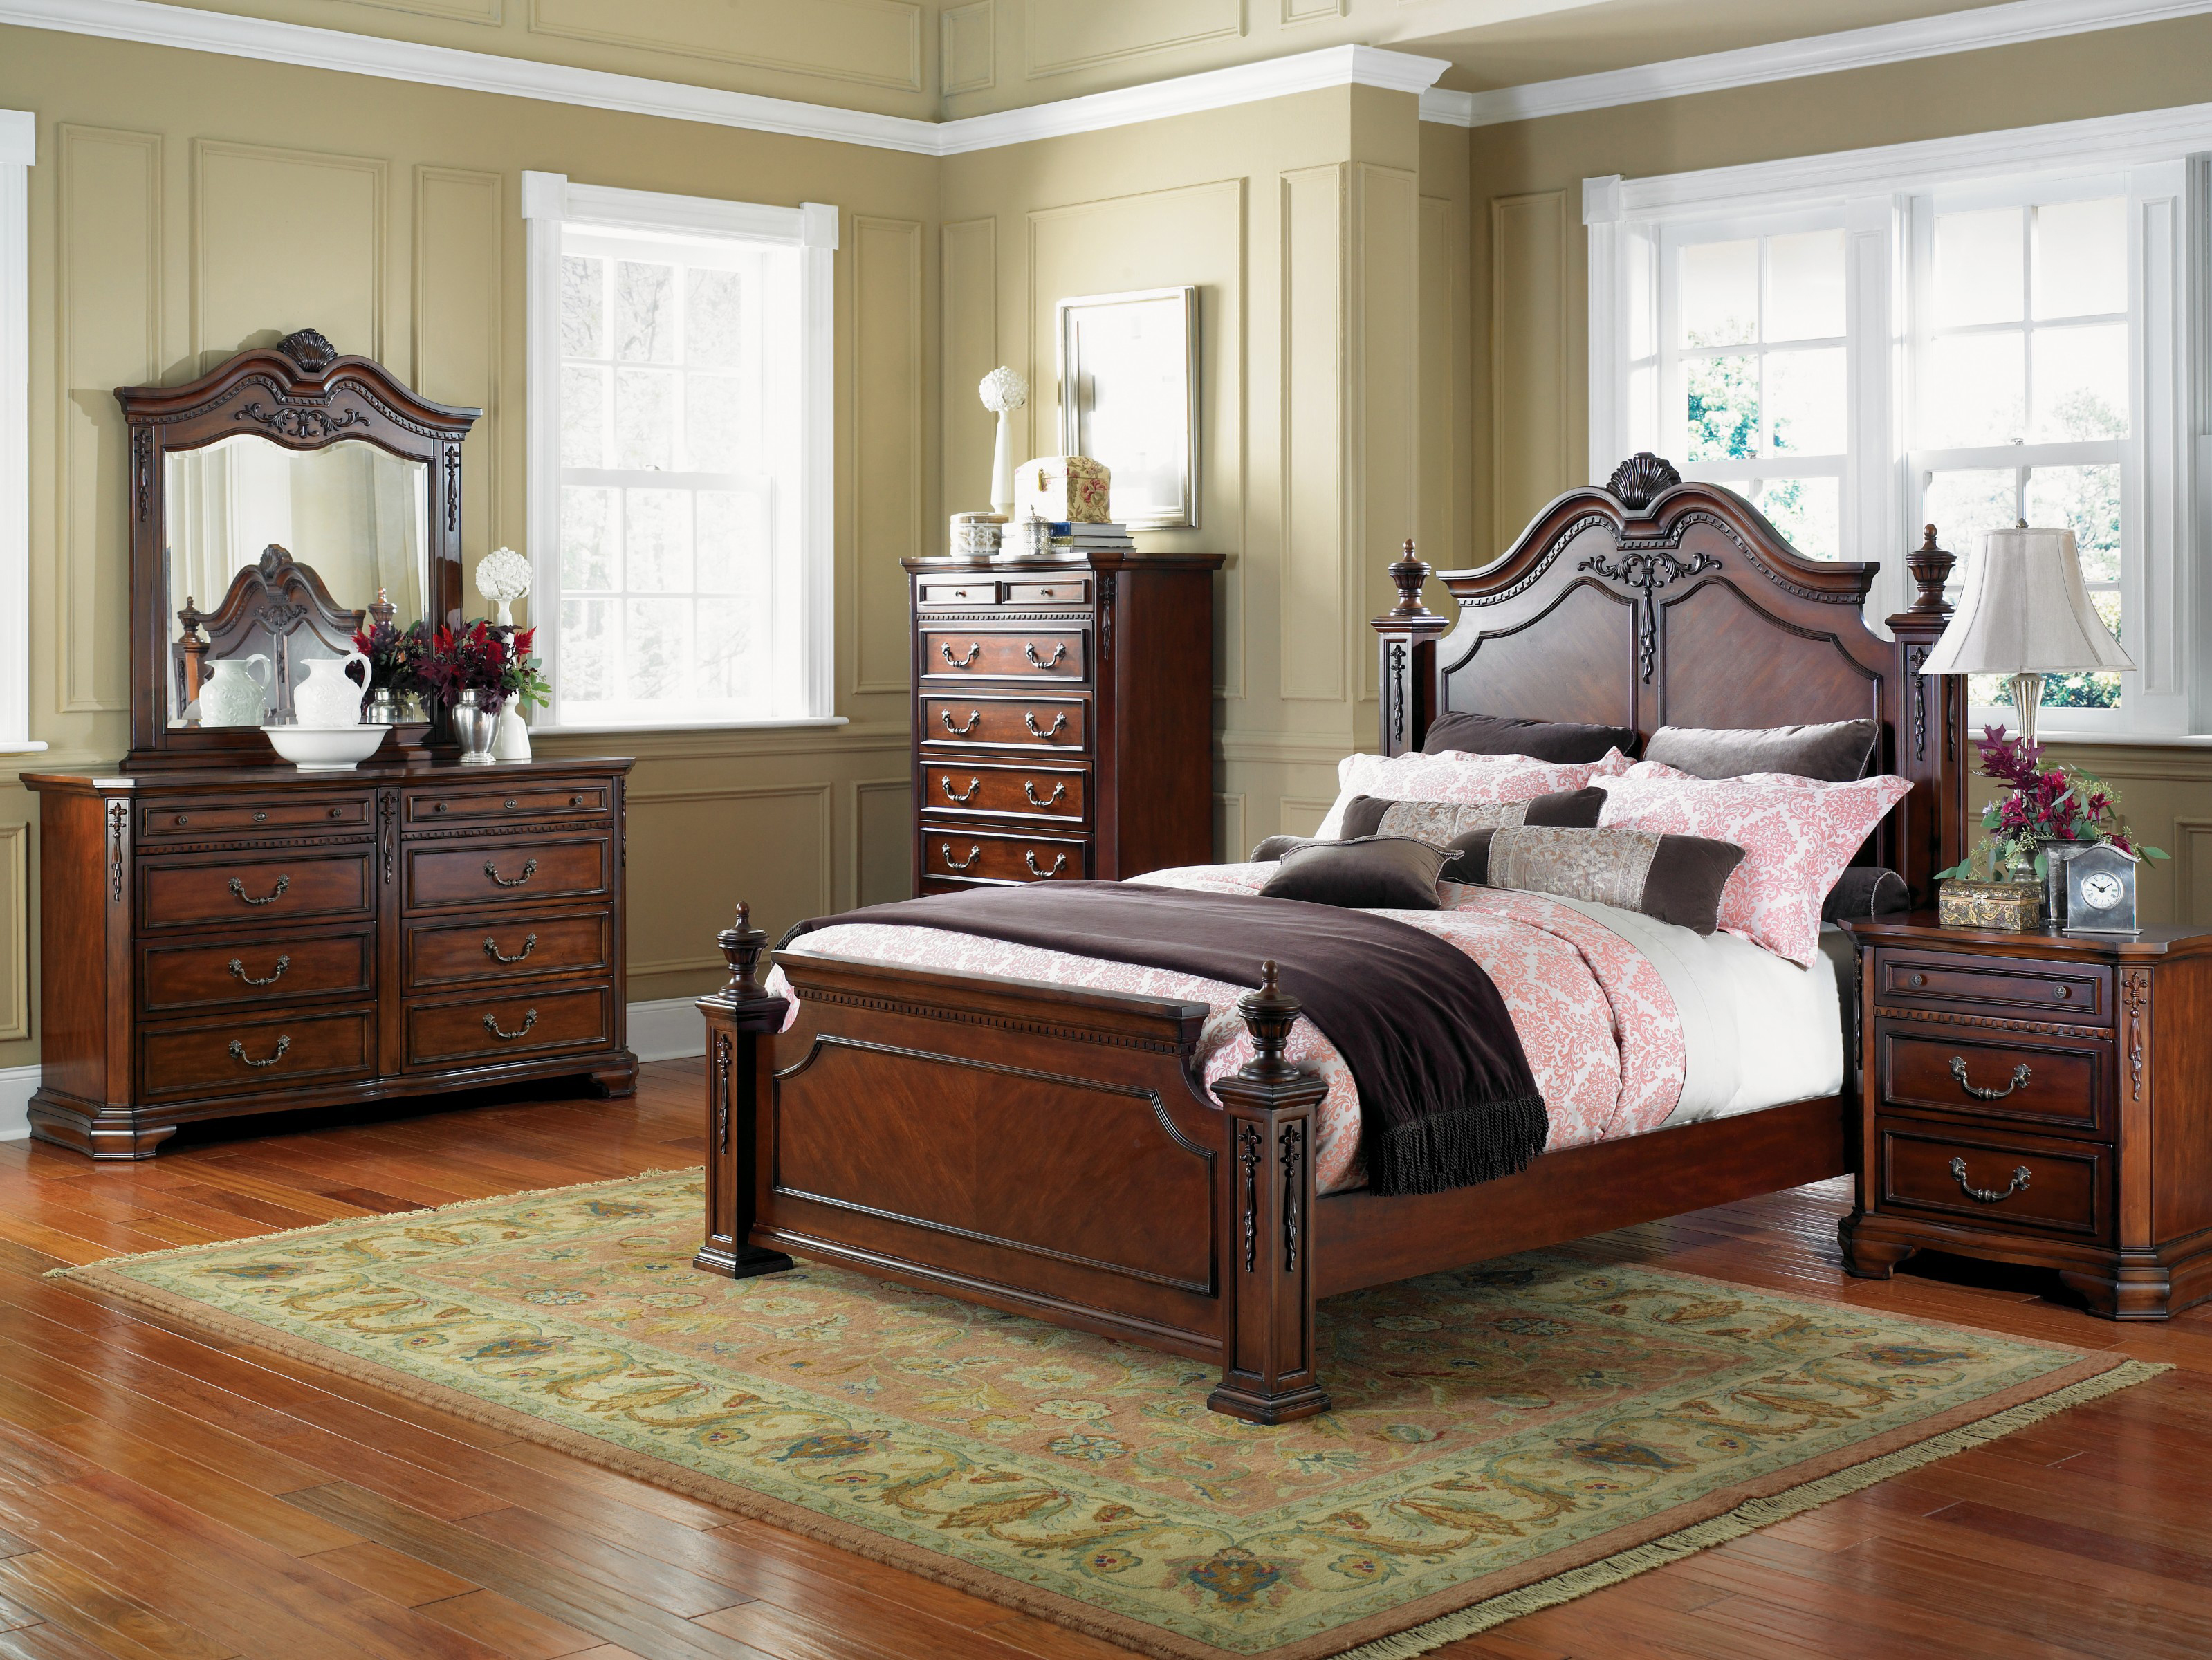 Excelsior Bedroom Furniture Set Collection - Request a FREE Quote